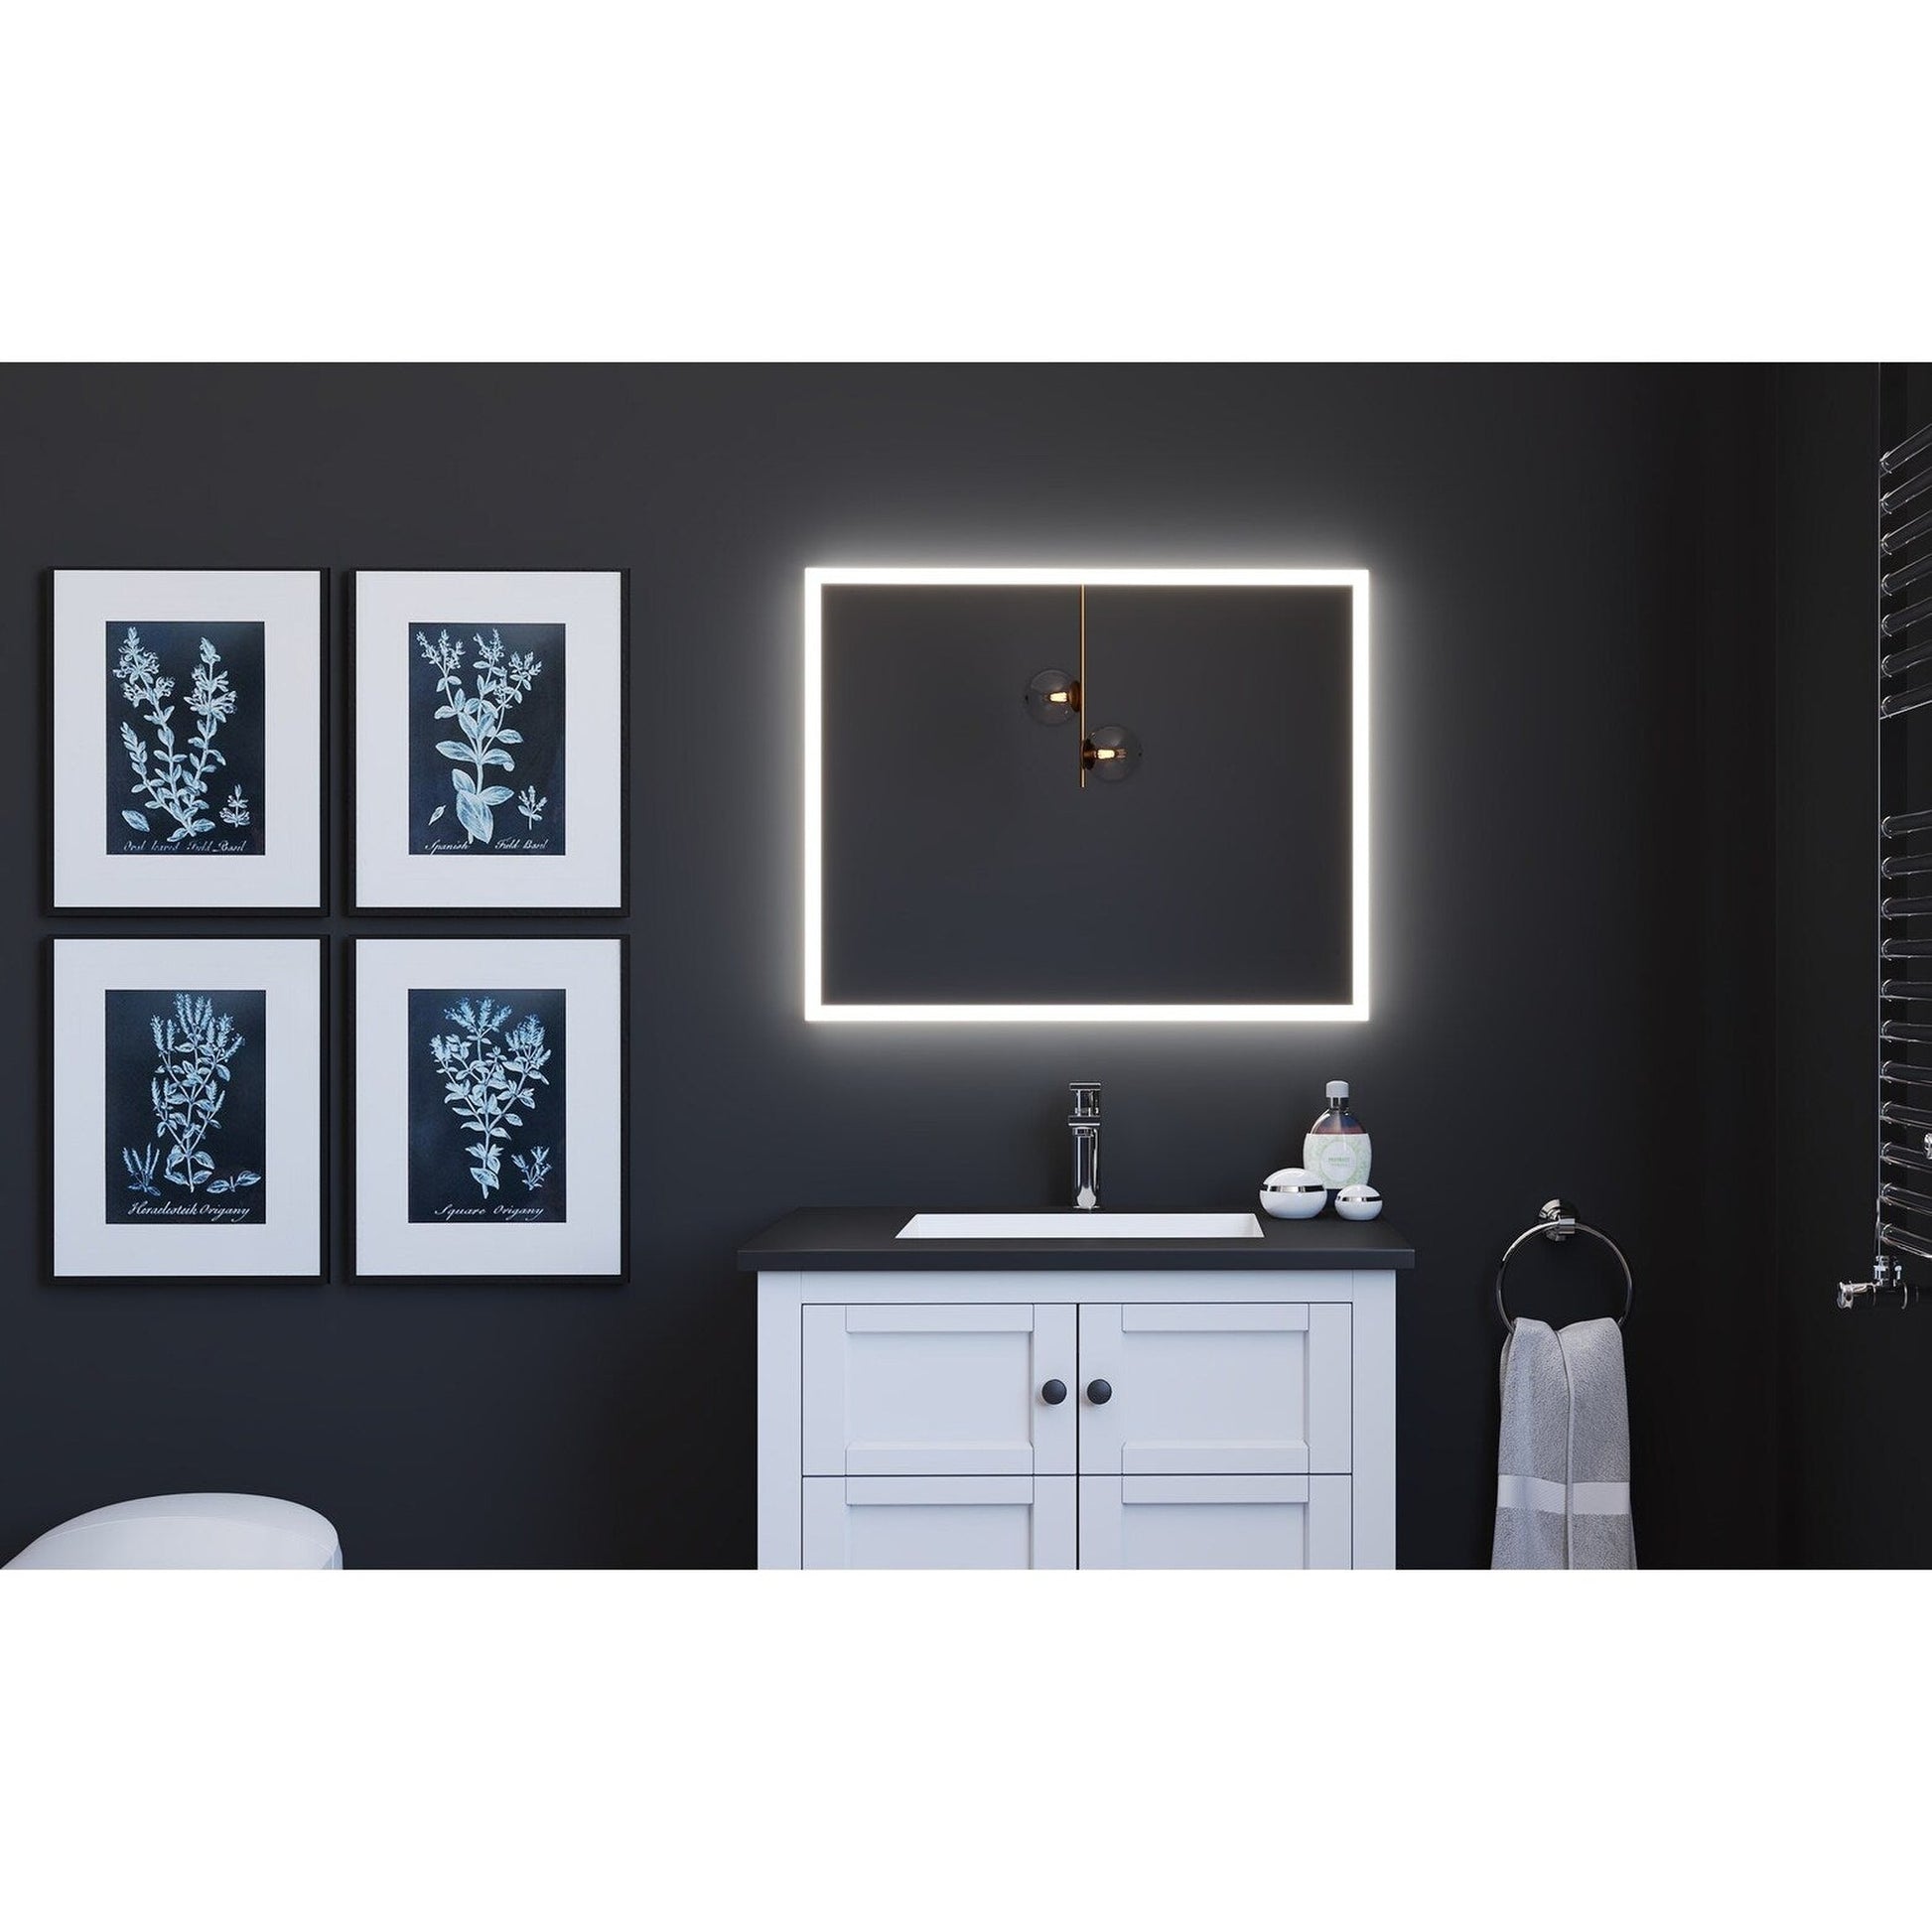 Castello USA Lisa 24" x 30" Dimmable LED Smart Mirror With Hands-Free Voice Control Without Apps or Smart Devices